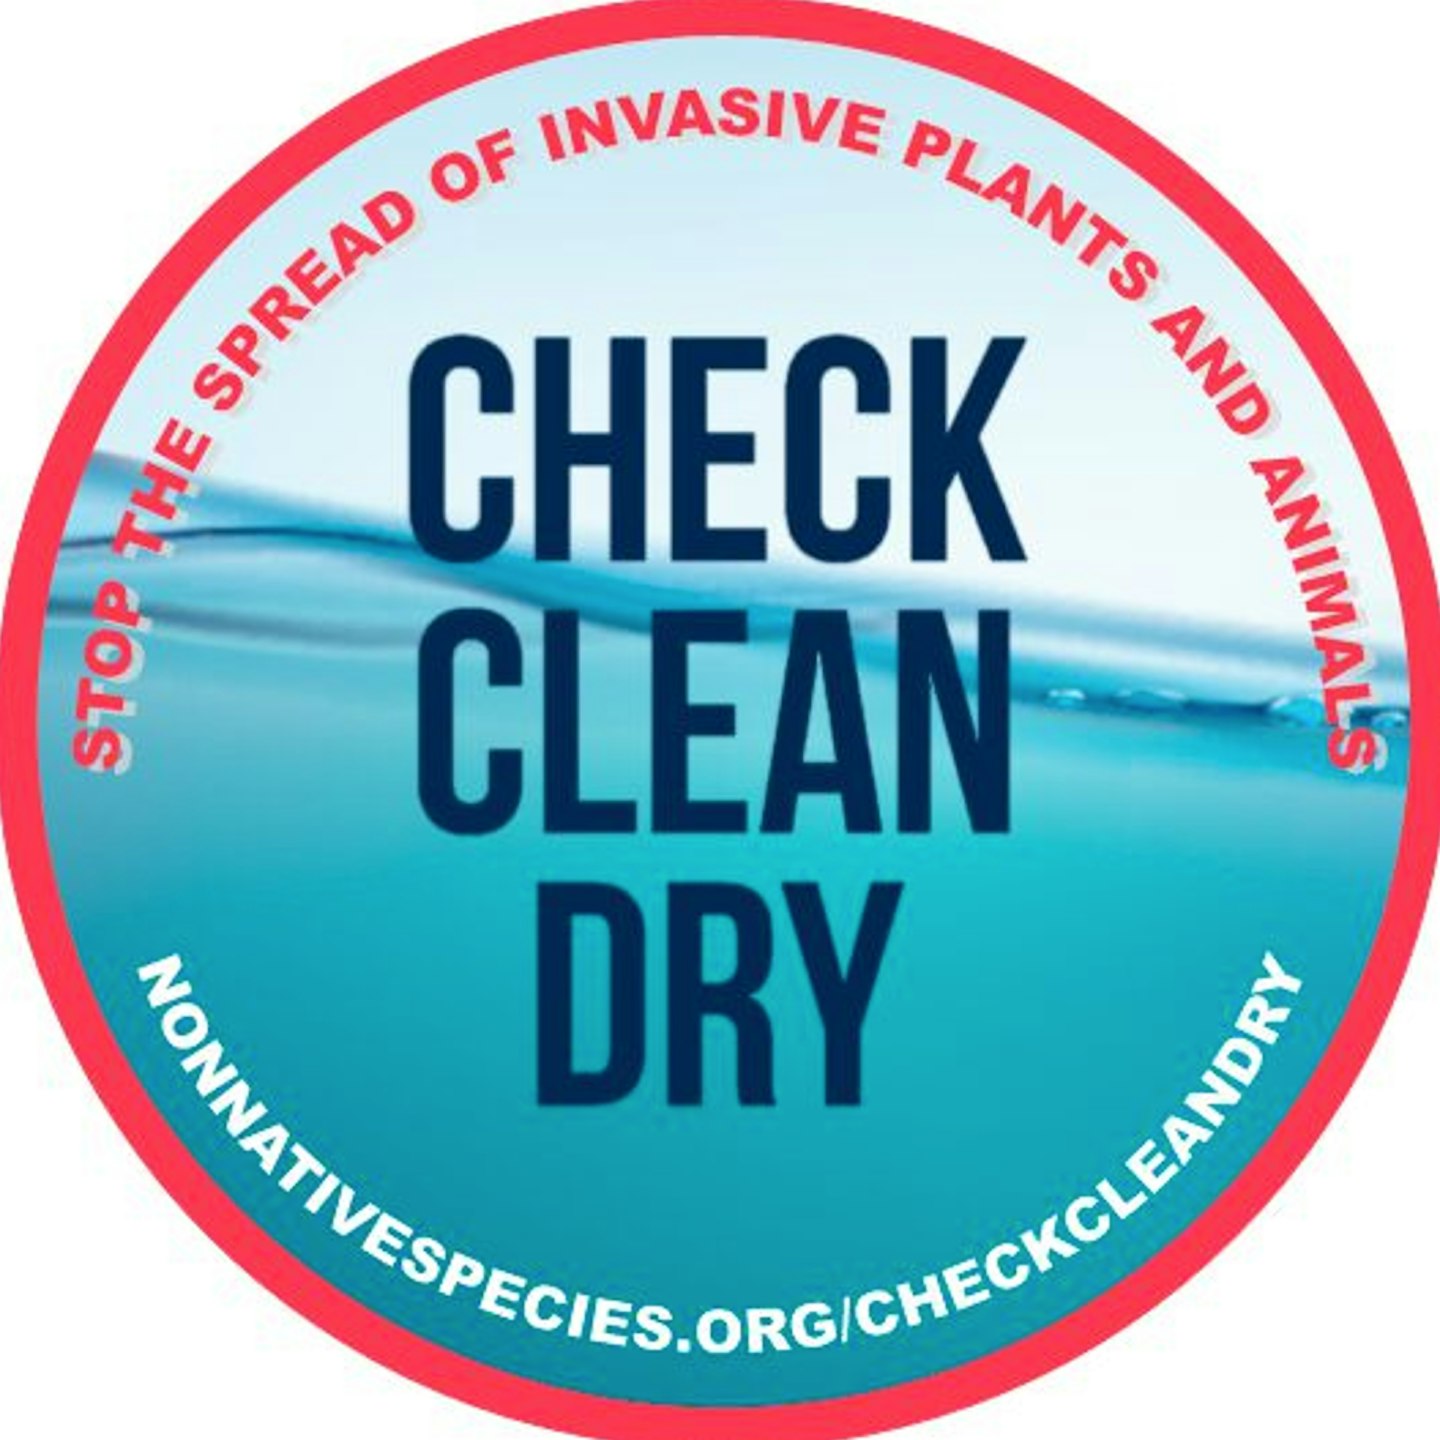 All of your kit, from keepnets and stink bags to waders and wellies, should be cleaned regularly